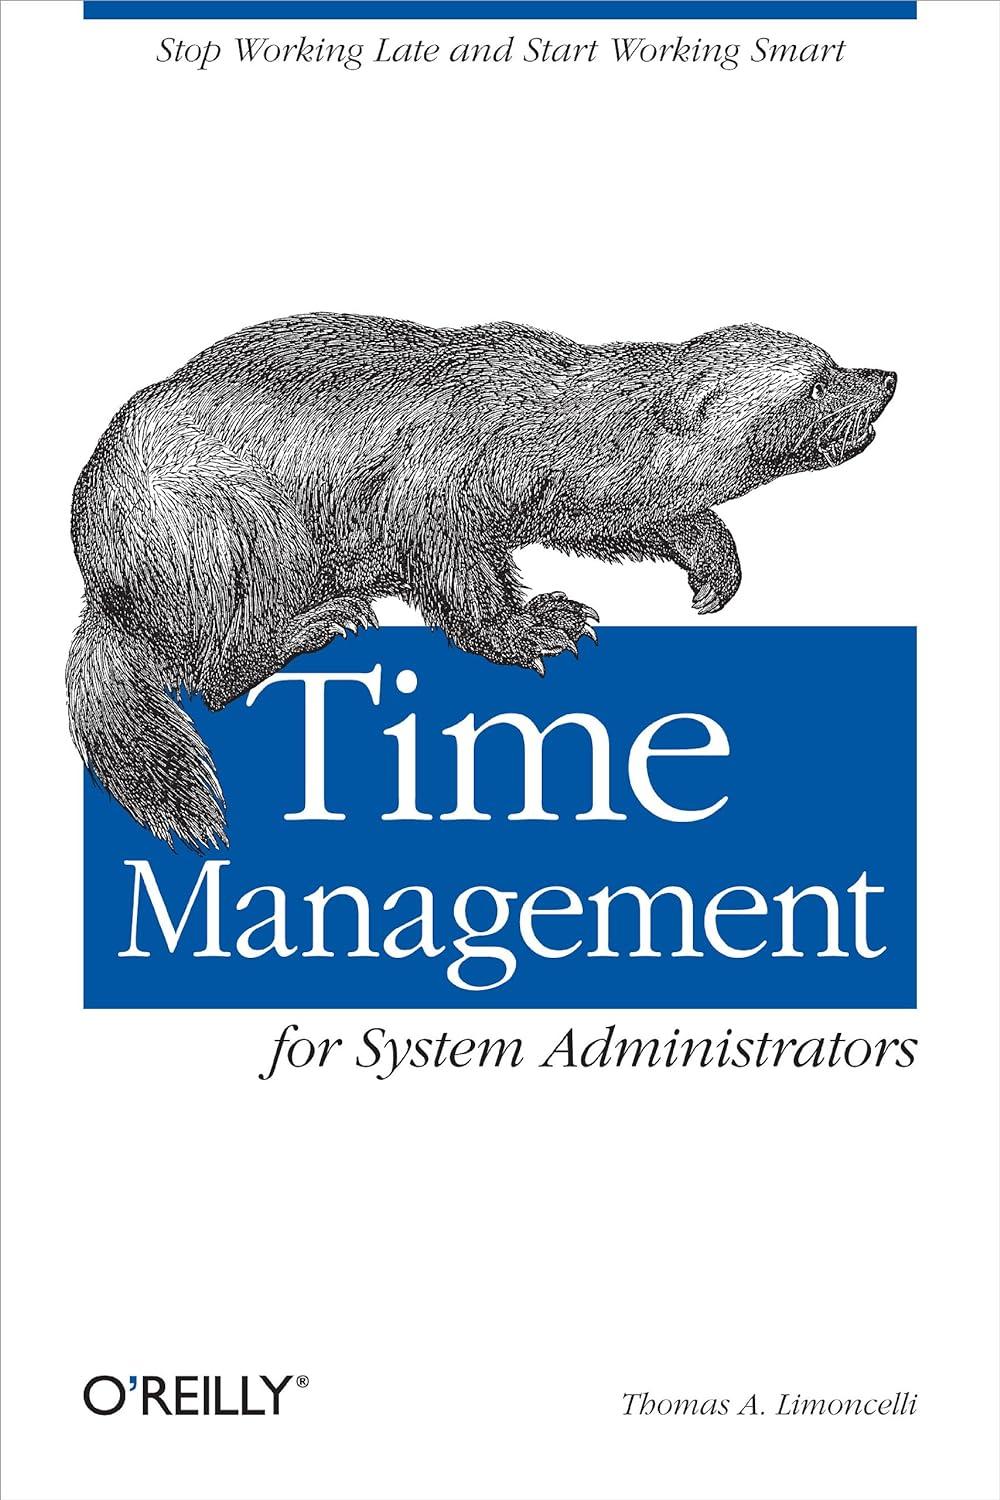 time management for system administrators: stop working late and start working smart 1st edition thomas